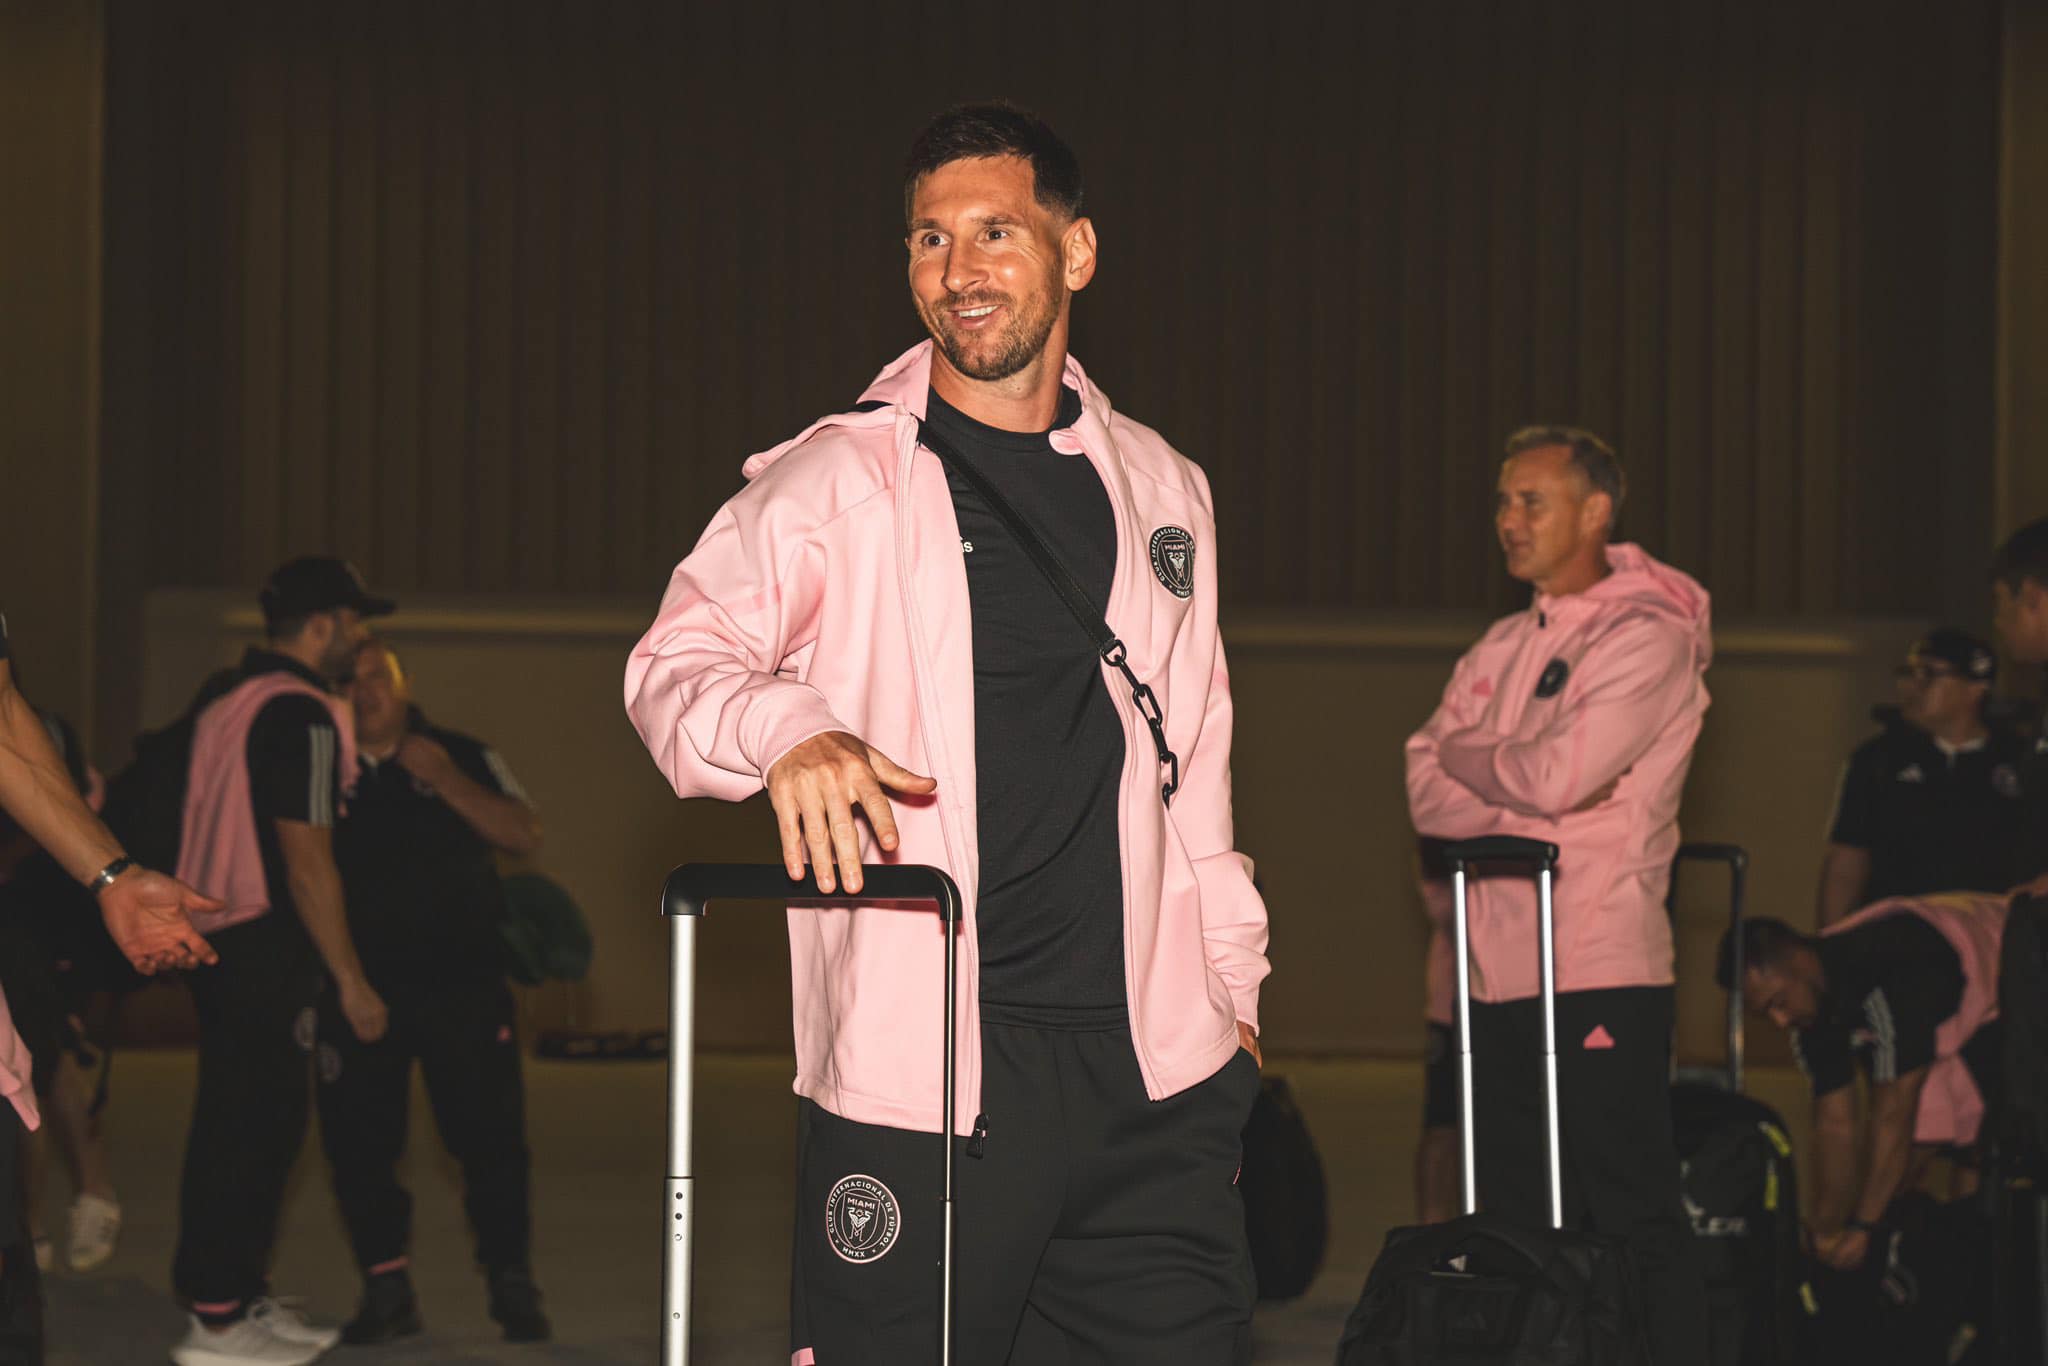 Arriving in El Salvador, Messi took photos with lucky fans